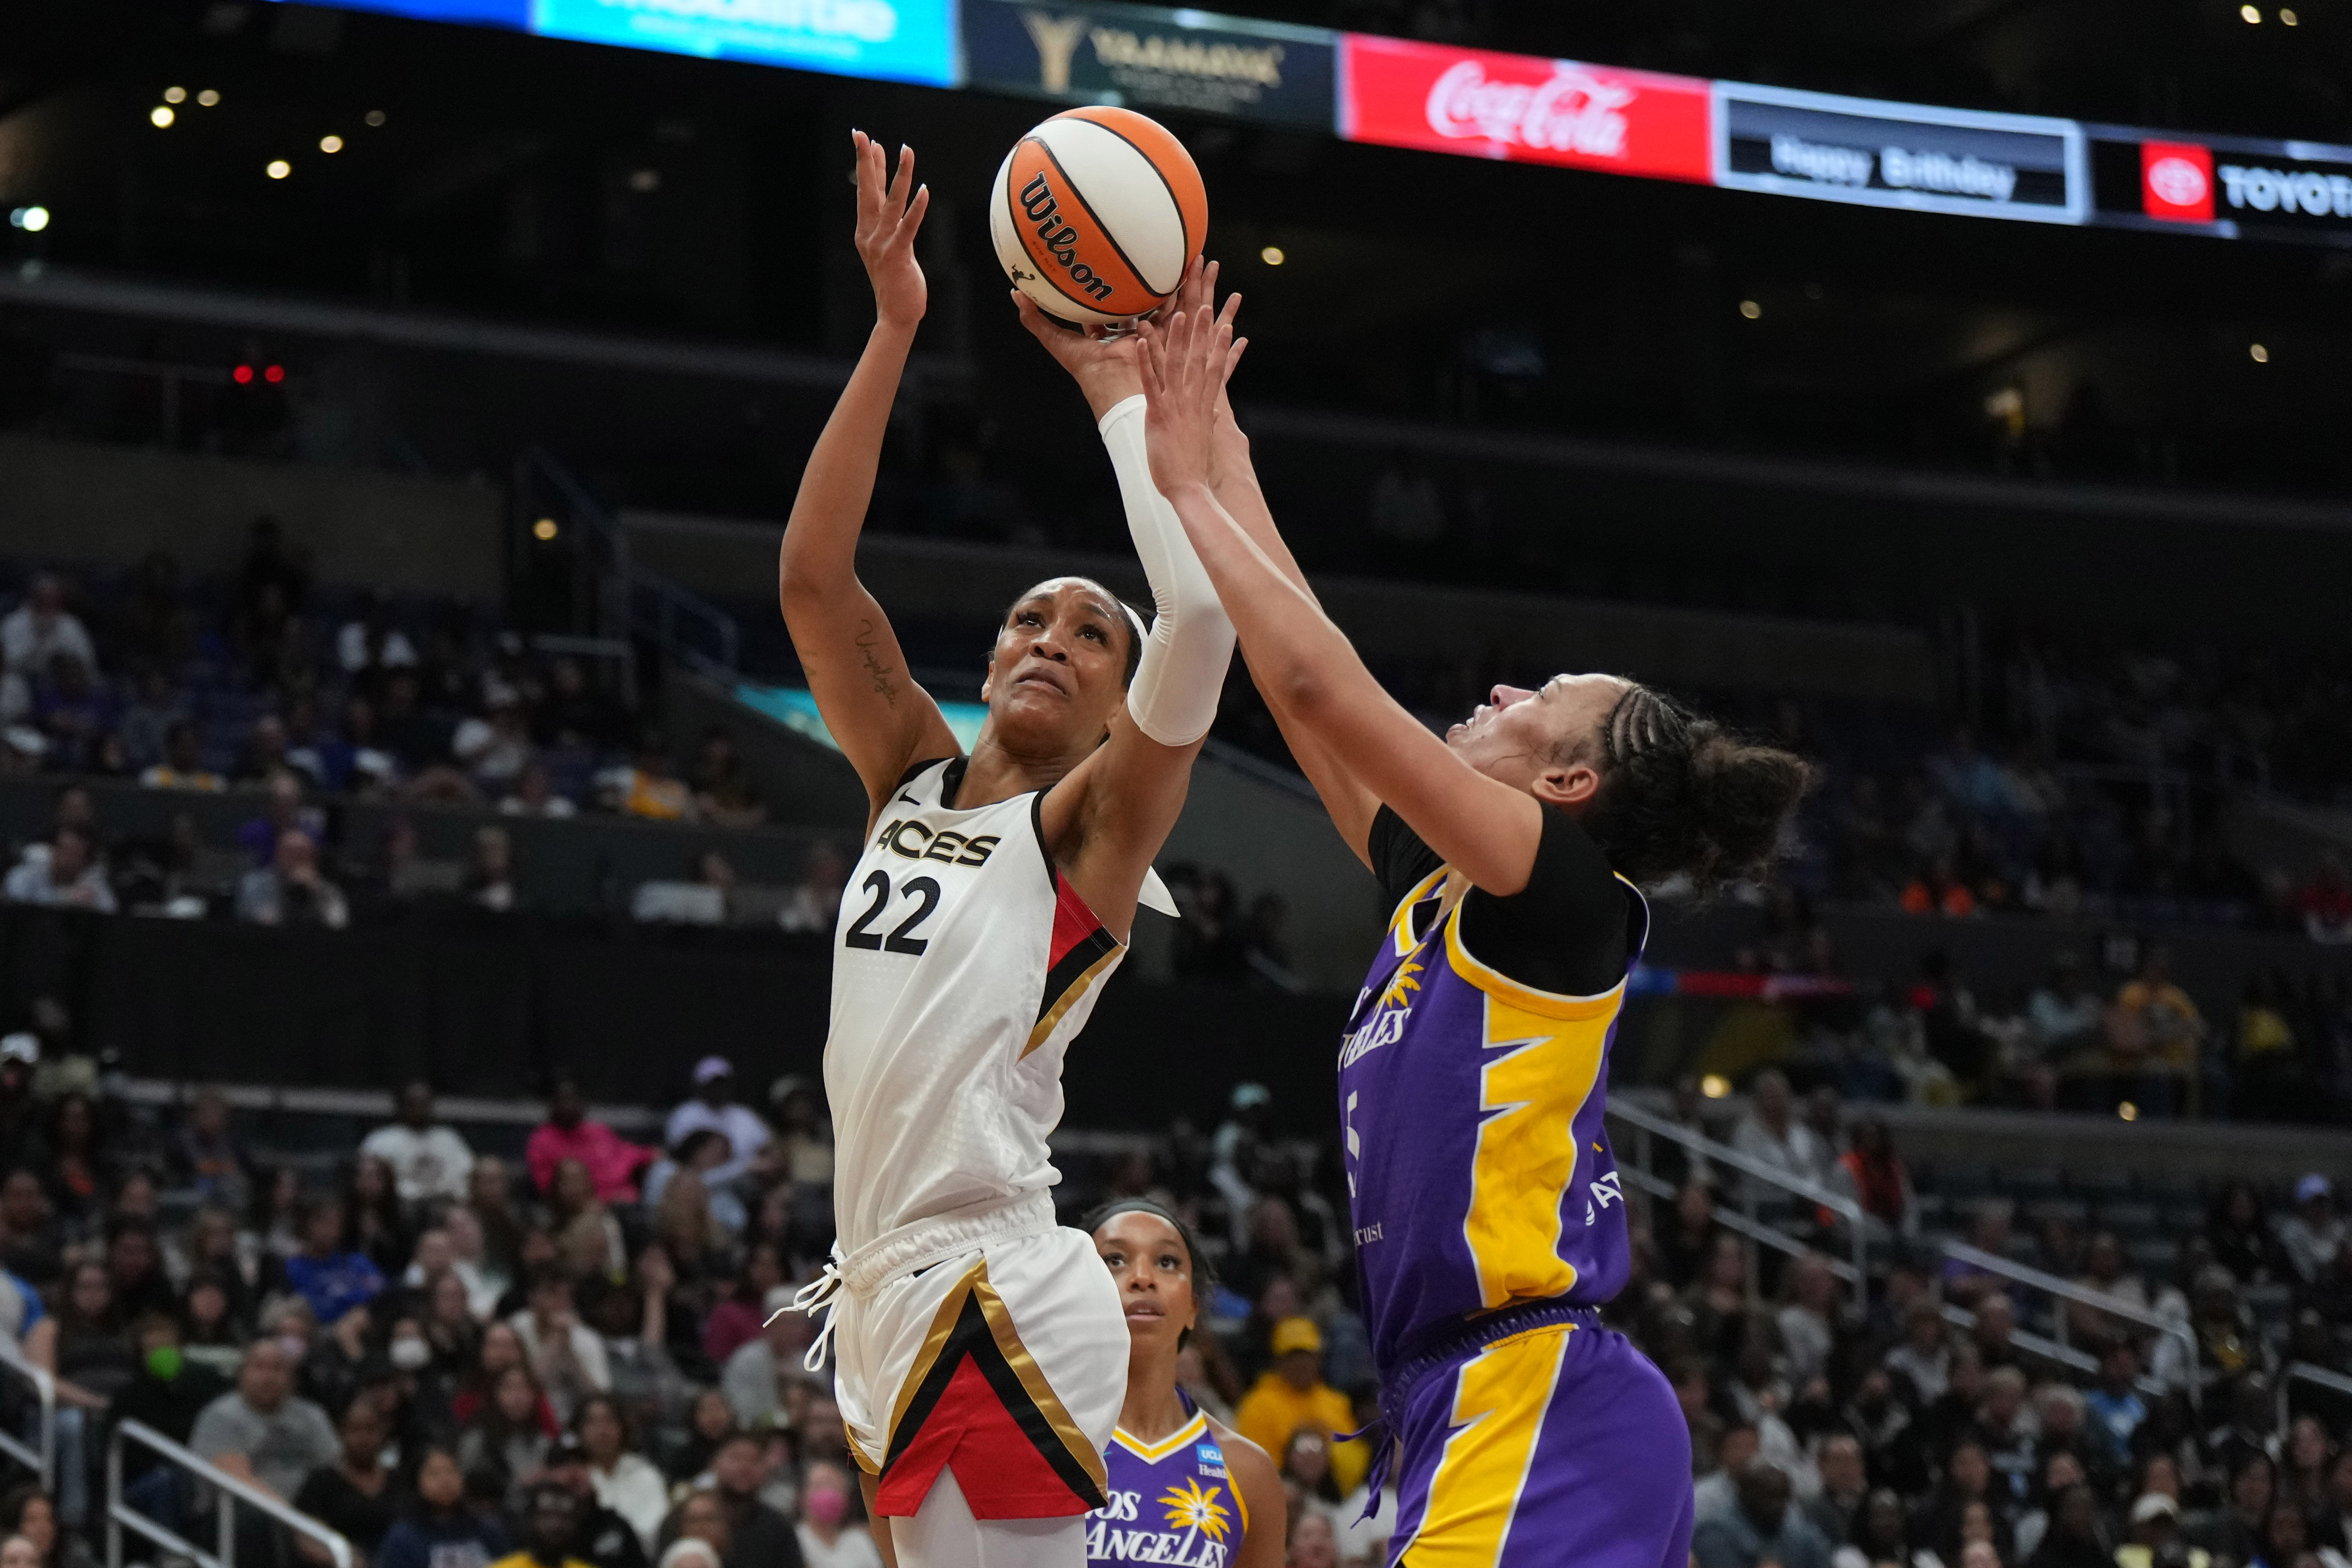 WNBA superteams, the New York Liberty and Las Vegas Aces, both have seen ticket sale jumps.